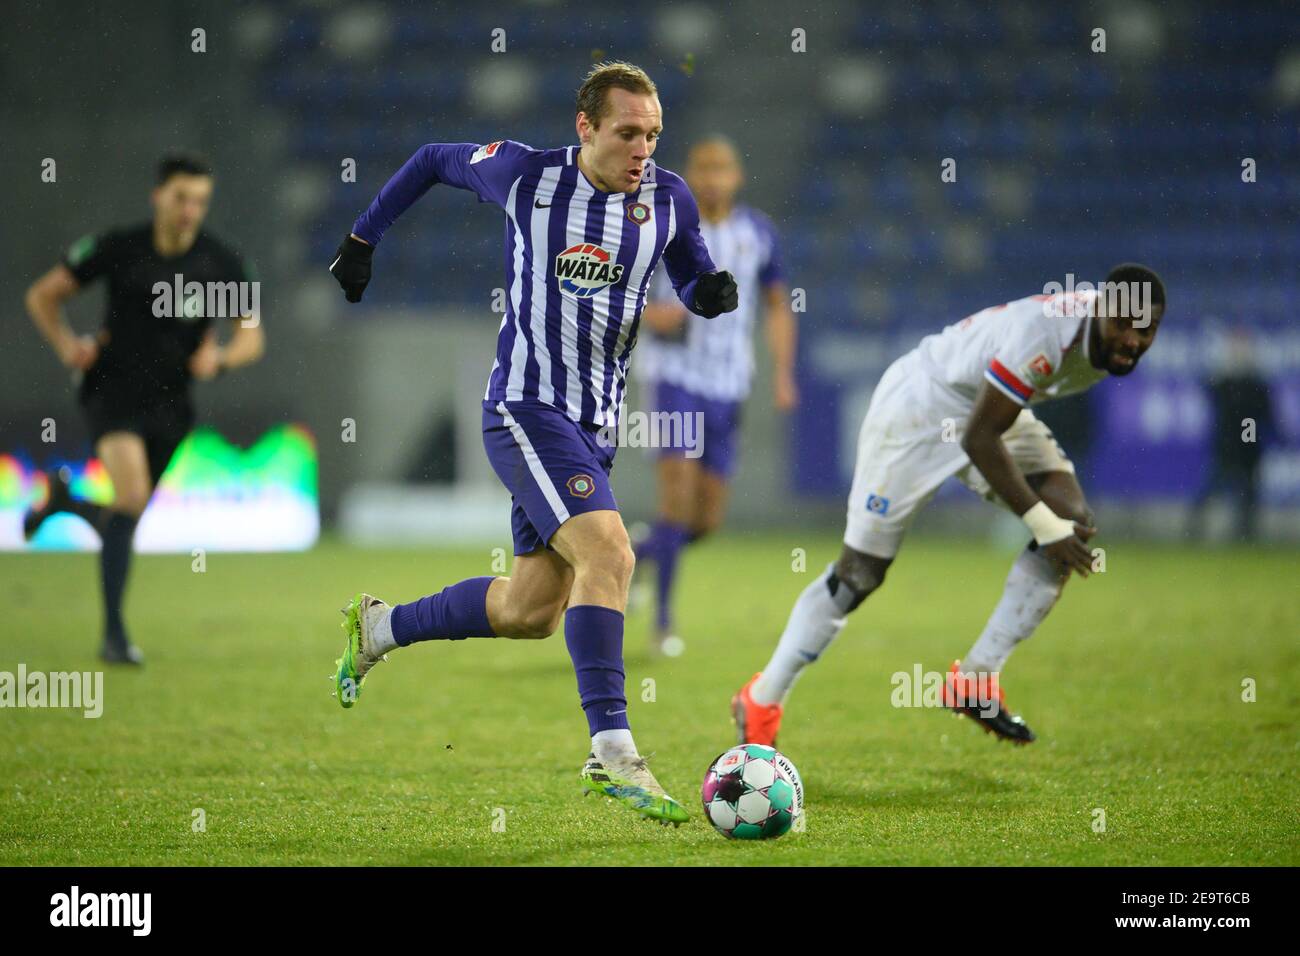 Aue, Germany. 05th Feb, 2021. Football: 2. Bundesliga, FC Erzgebirge Aue - Hamburger SV, Matchday 20, at Erzgebirgsstadion. Aue's Ben Zolinski plays the ball. Credit: Robert Michael/dpa-Zentralbild/dpa - IMPORTANT NOTE: In accordance with the regulations of the DFL Deutsche Fußball Liga and/or the DFB Deutscher Fußball-Bund, it is prohibited to use or have used photographs taken in the stadium and/or of the match in the form of sequence pictures and/or video-like photo series./dpa/Alamy Live News Stock Photo